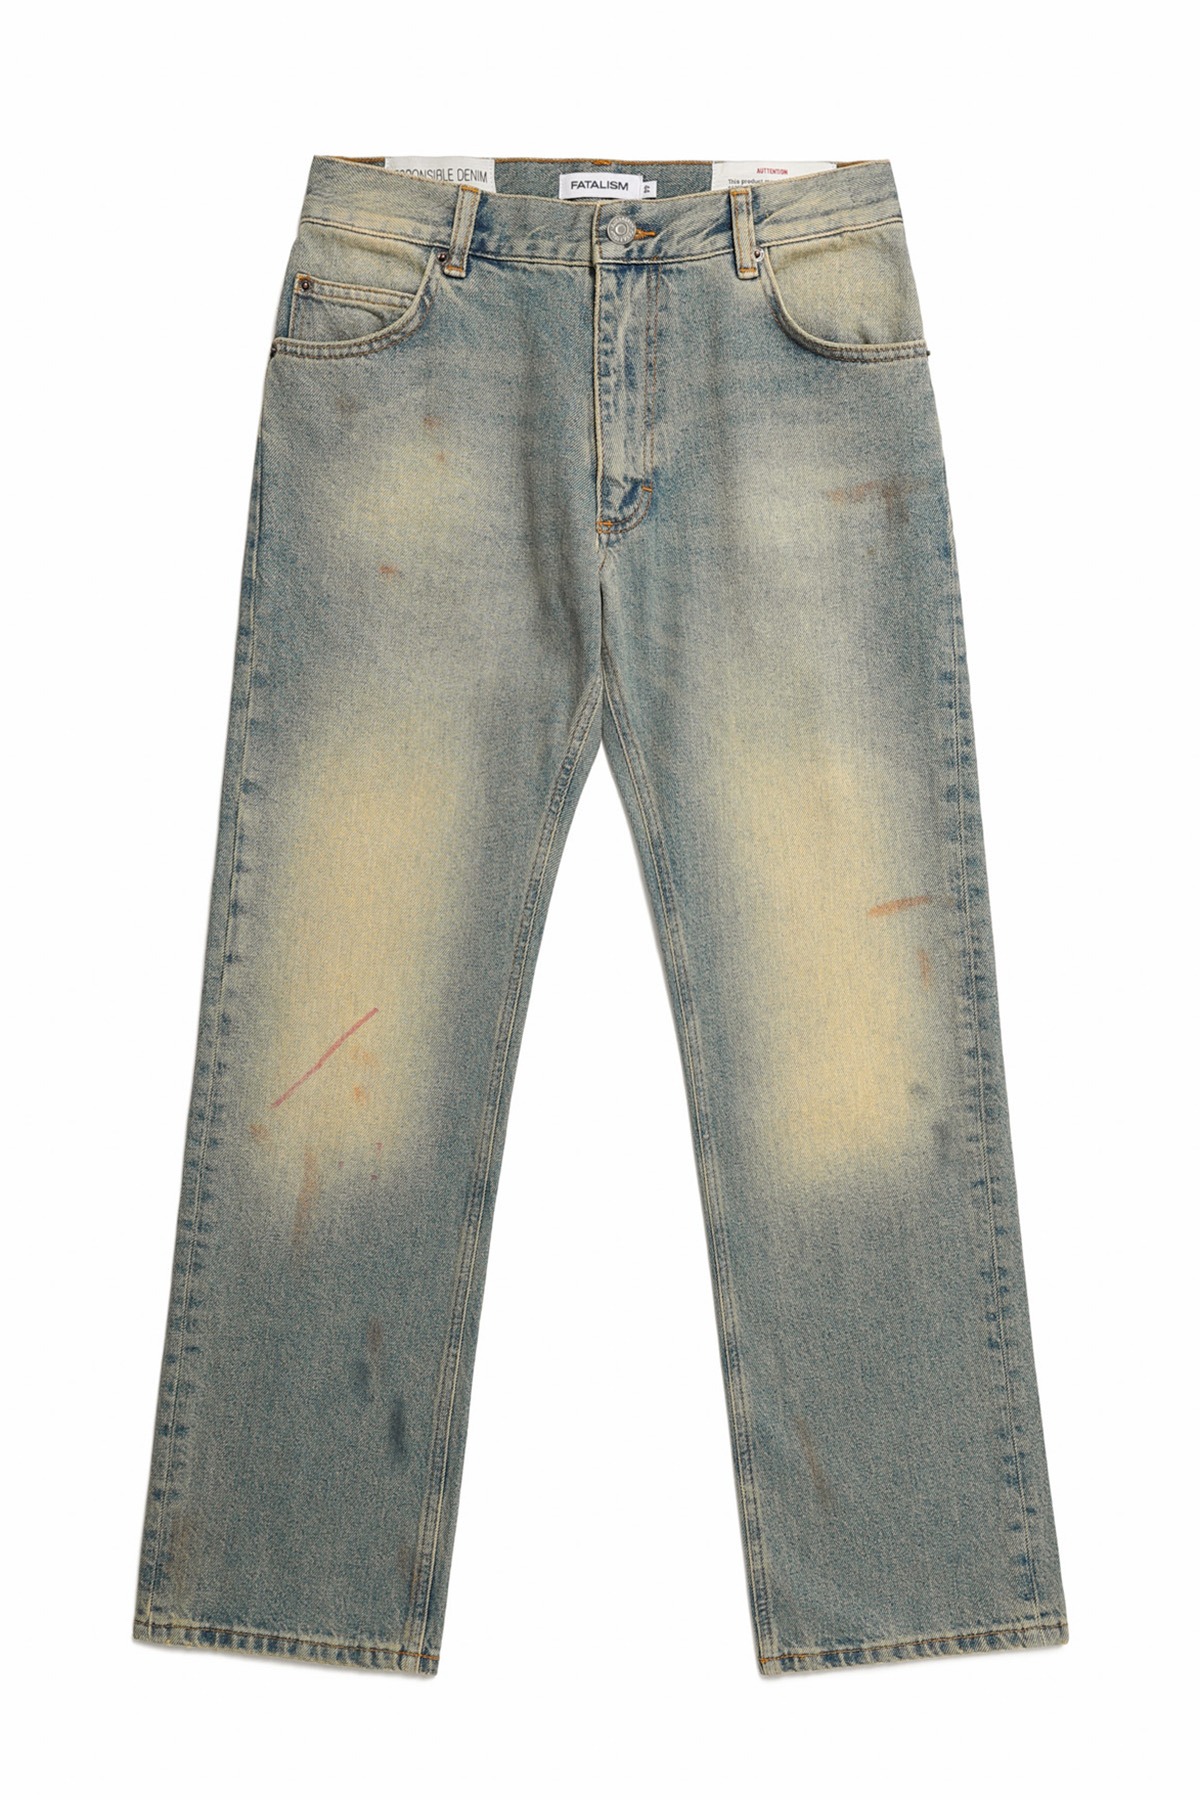 #0323 MILITARY BLUE DIRTY WASH CROP JEANS